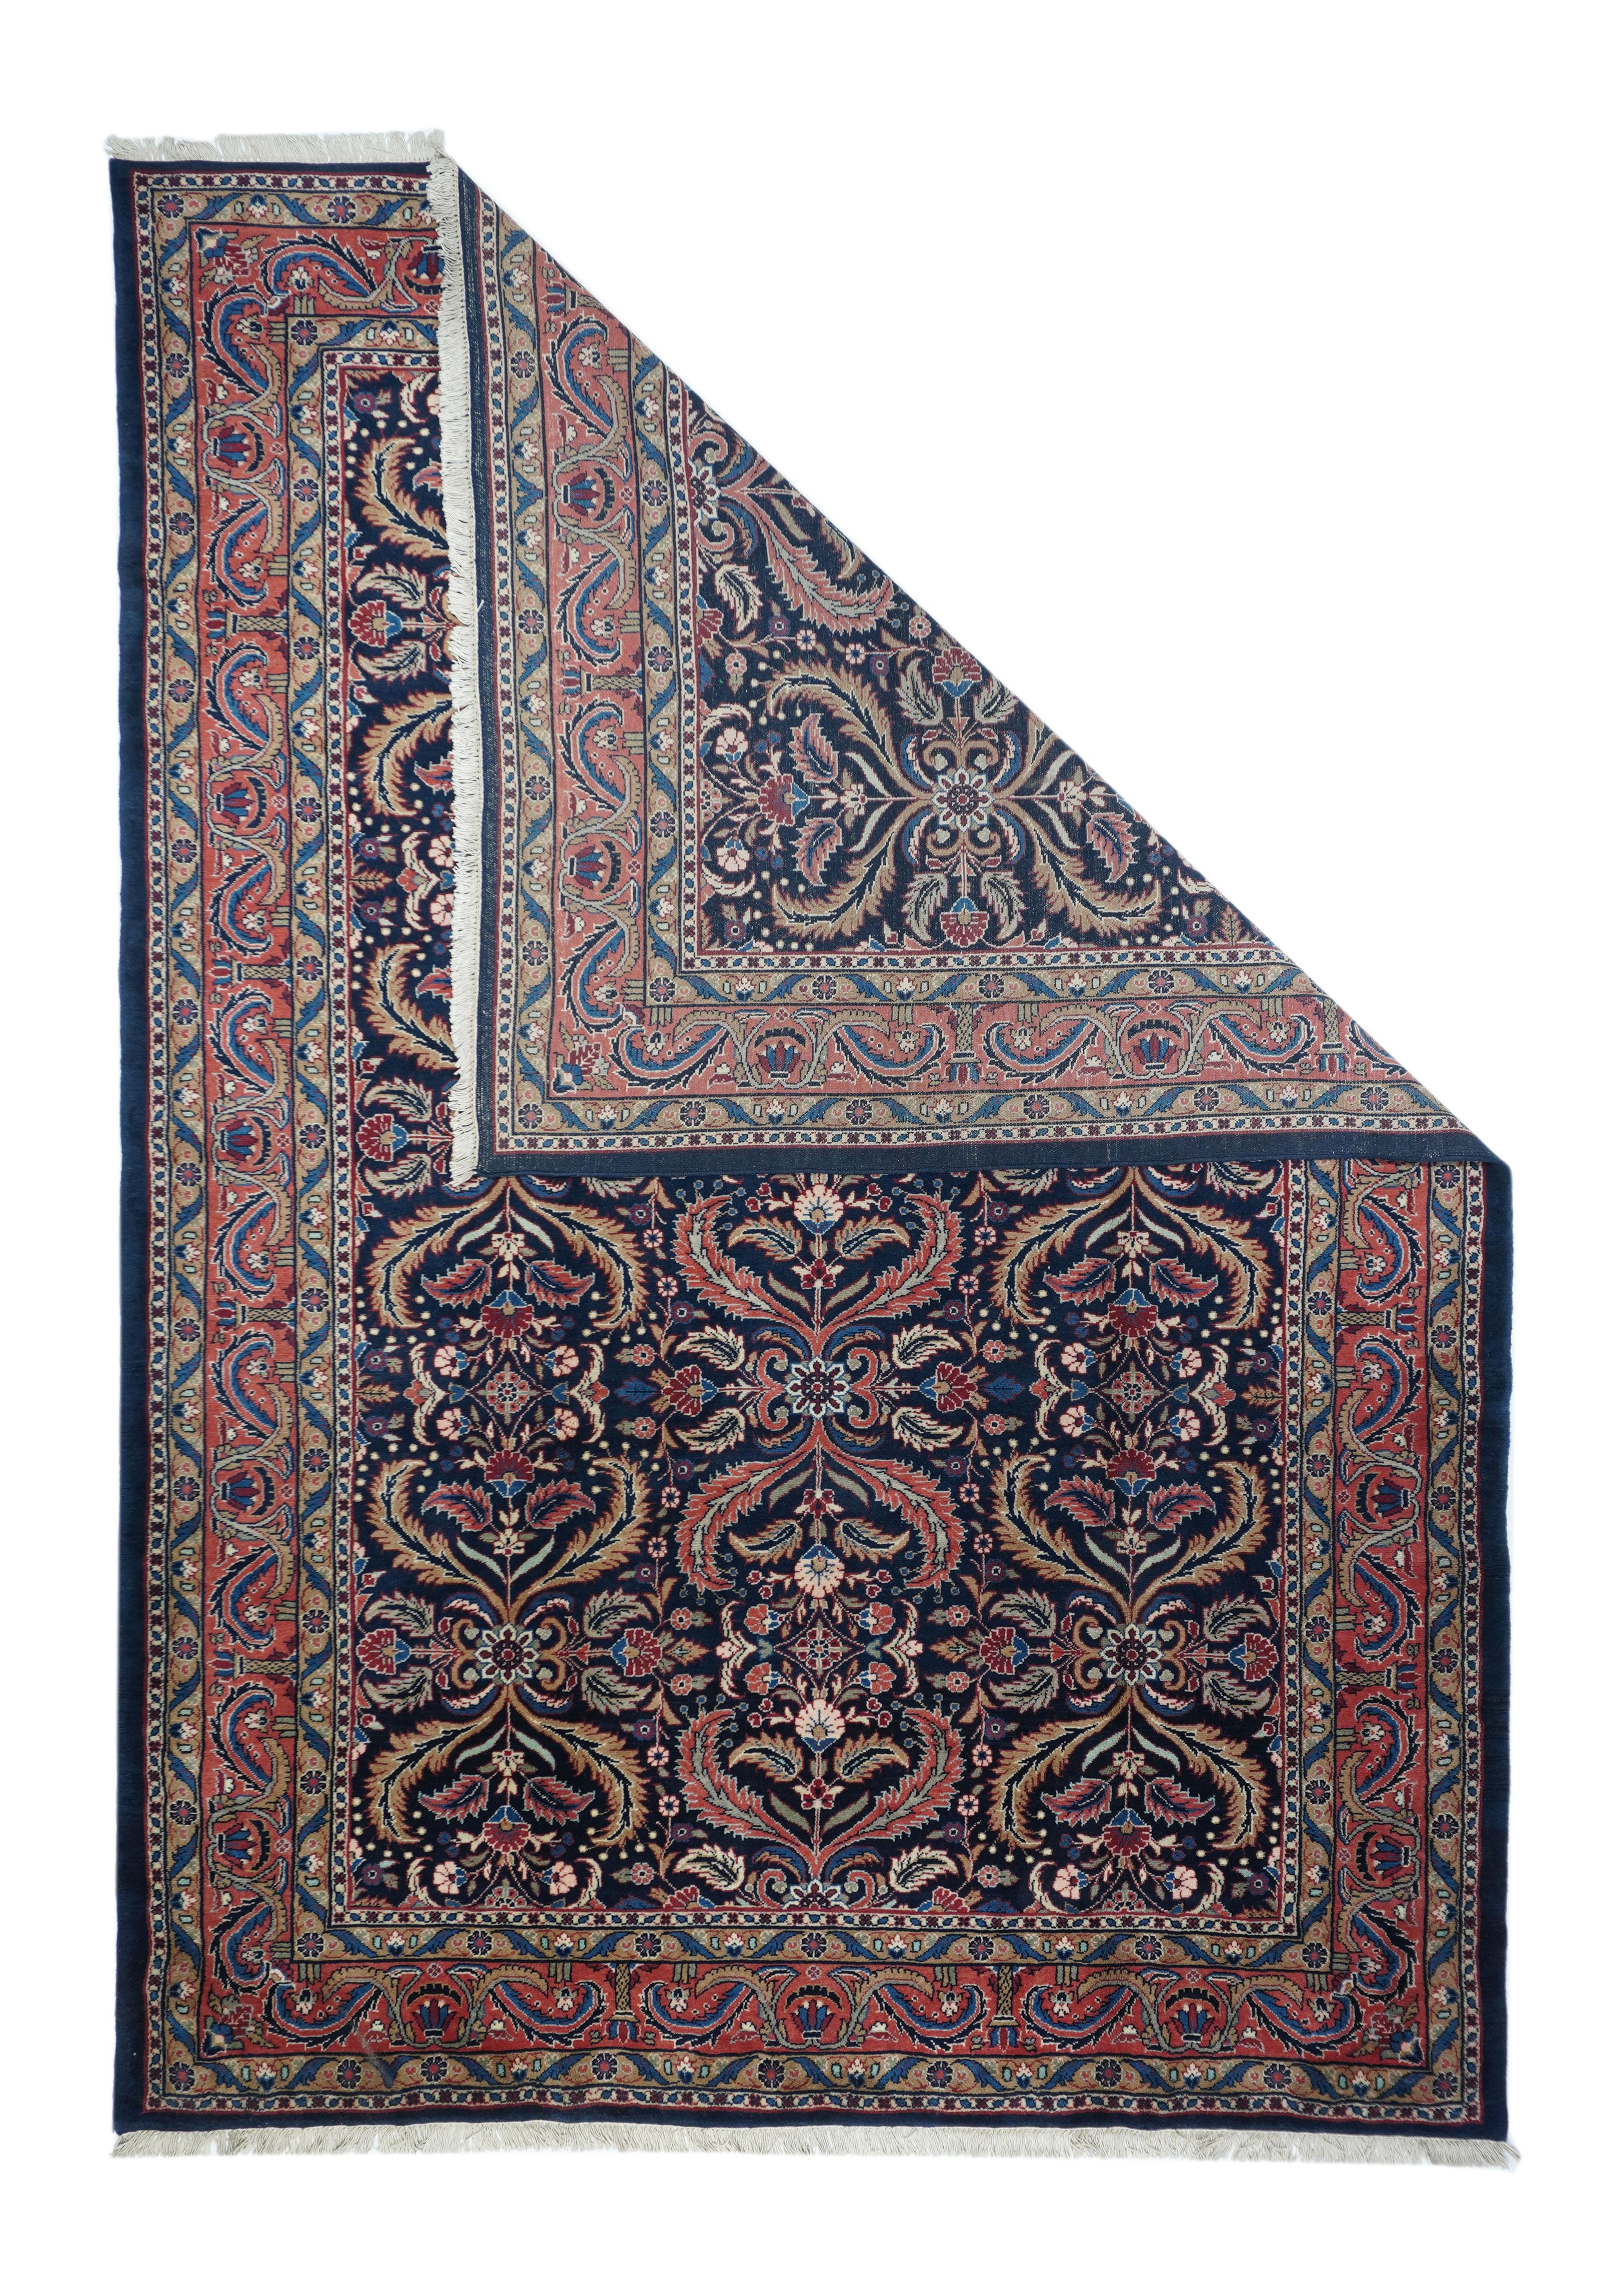 This visually striking, and probably unique designwise, SE Persian city carpet of medium-fine weave, shows a navy indigo field precisely, but not stiffly, covered by a three column allover pattern of pairs of curved, barbed leaves, with lesser